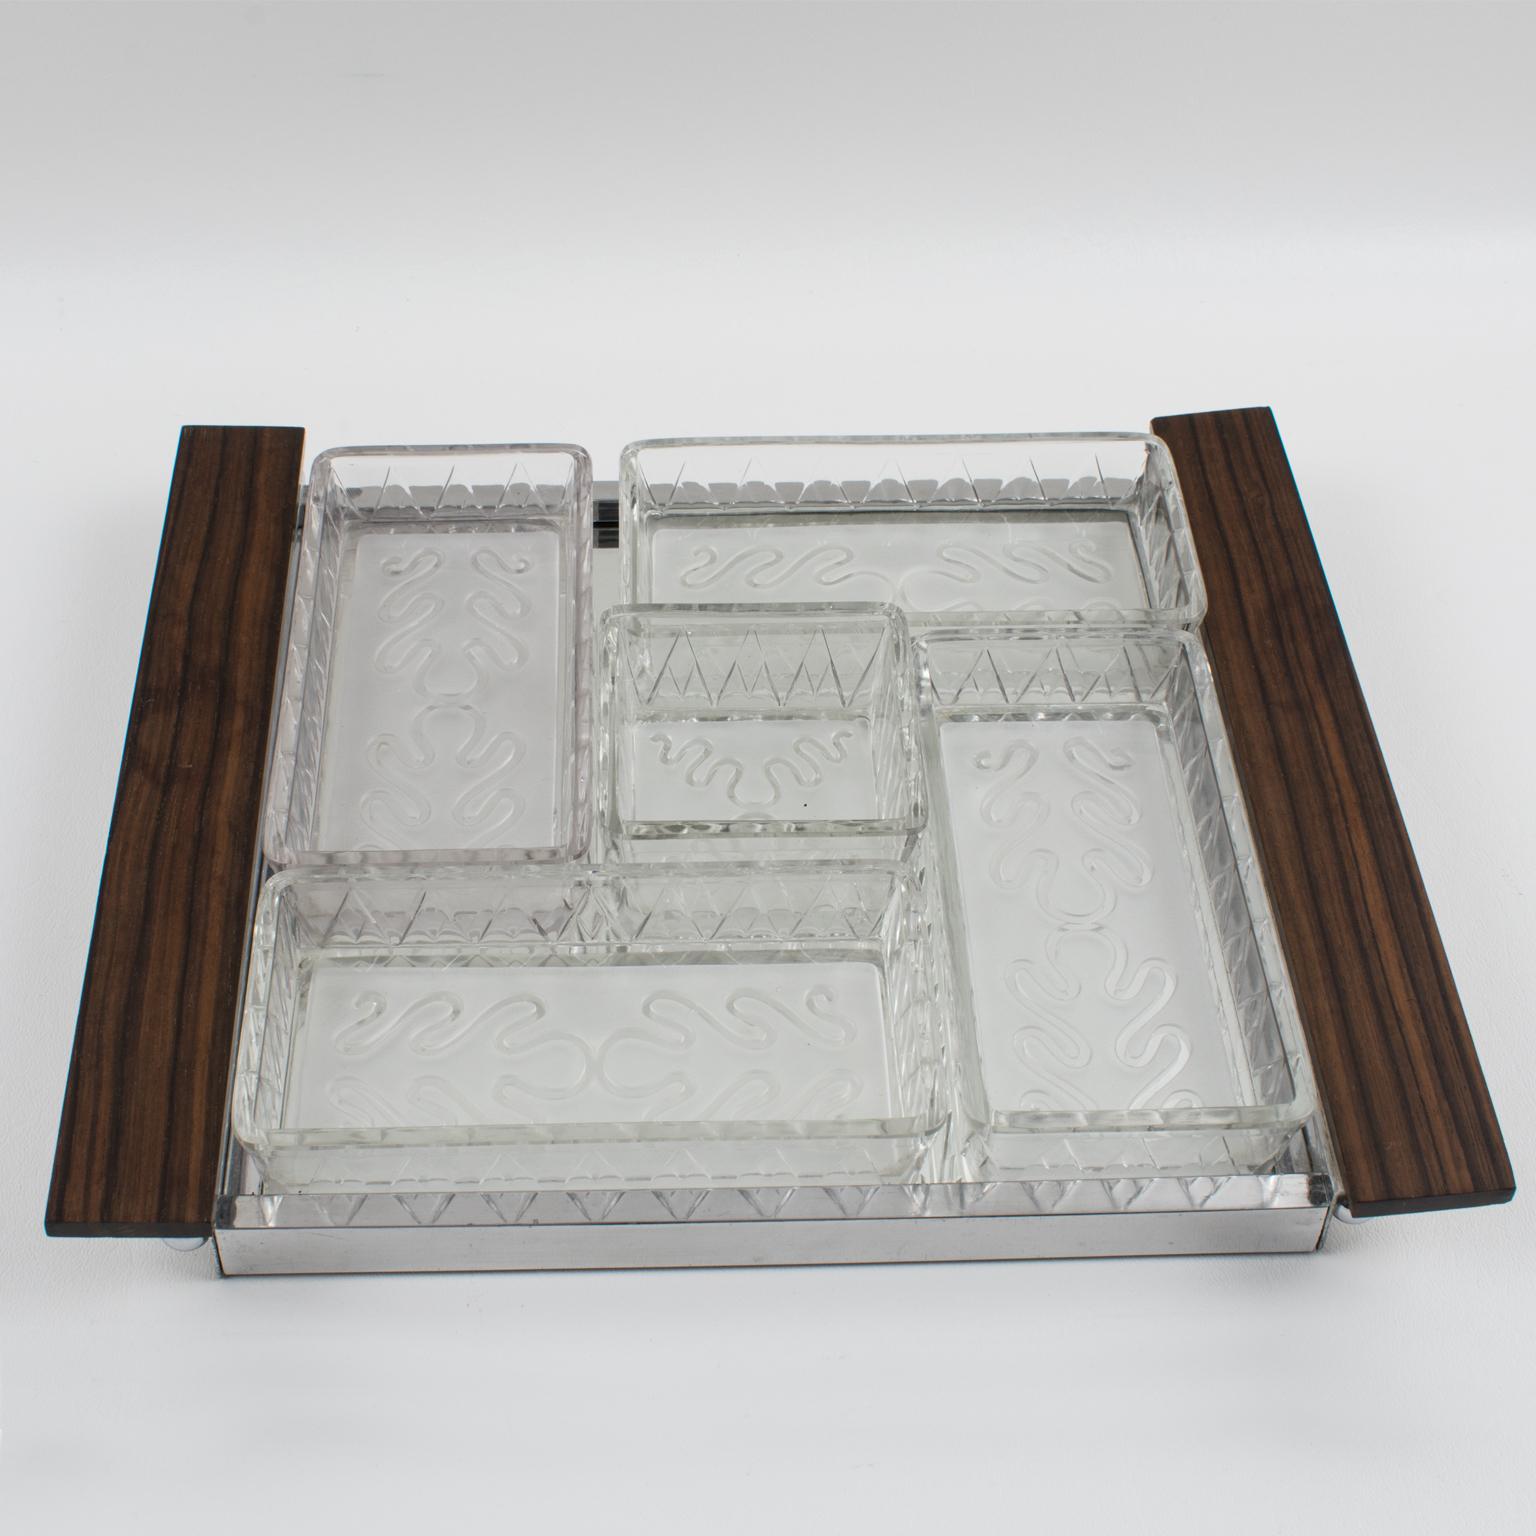 Mid-20th Century Art Deco Cocktail Barware Chrome and Macassar Wood Tray with Glass Dishes